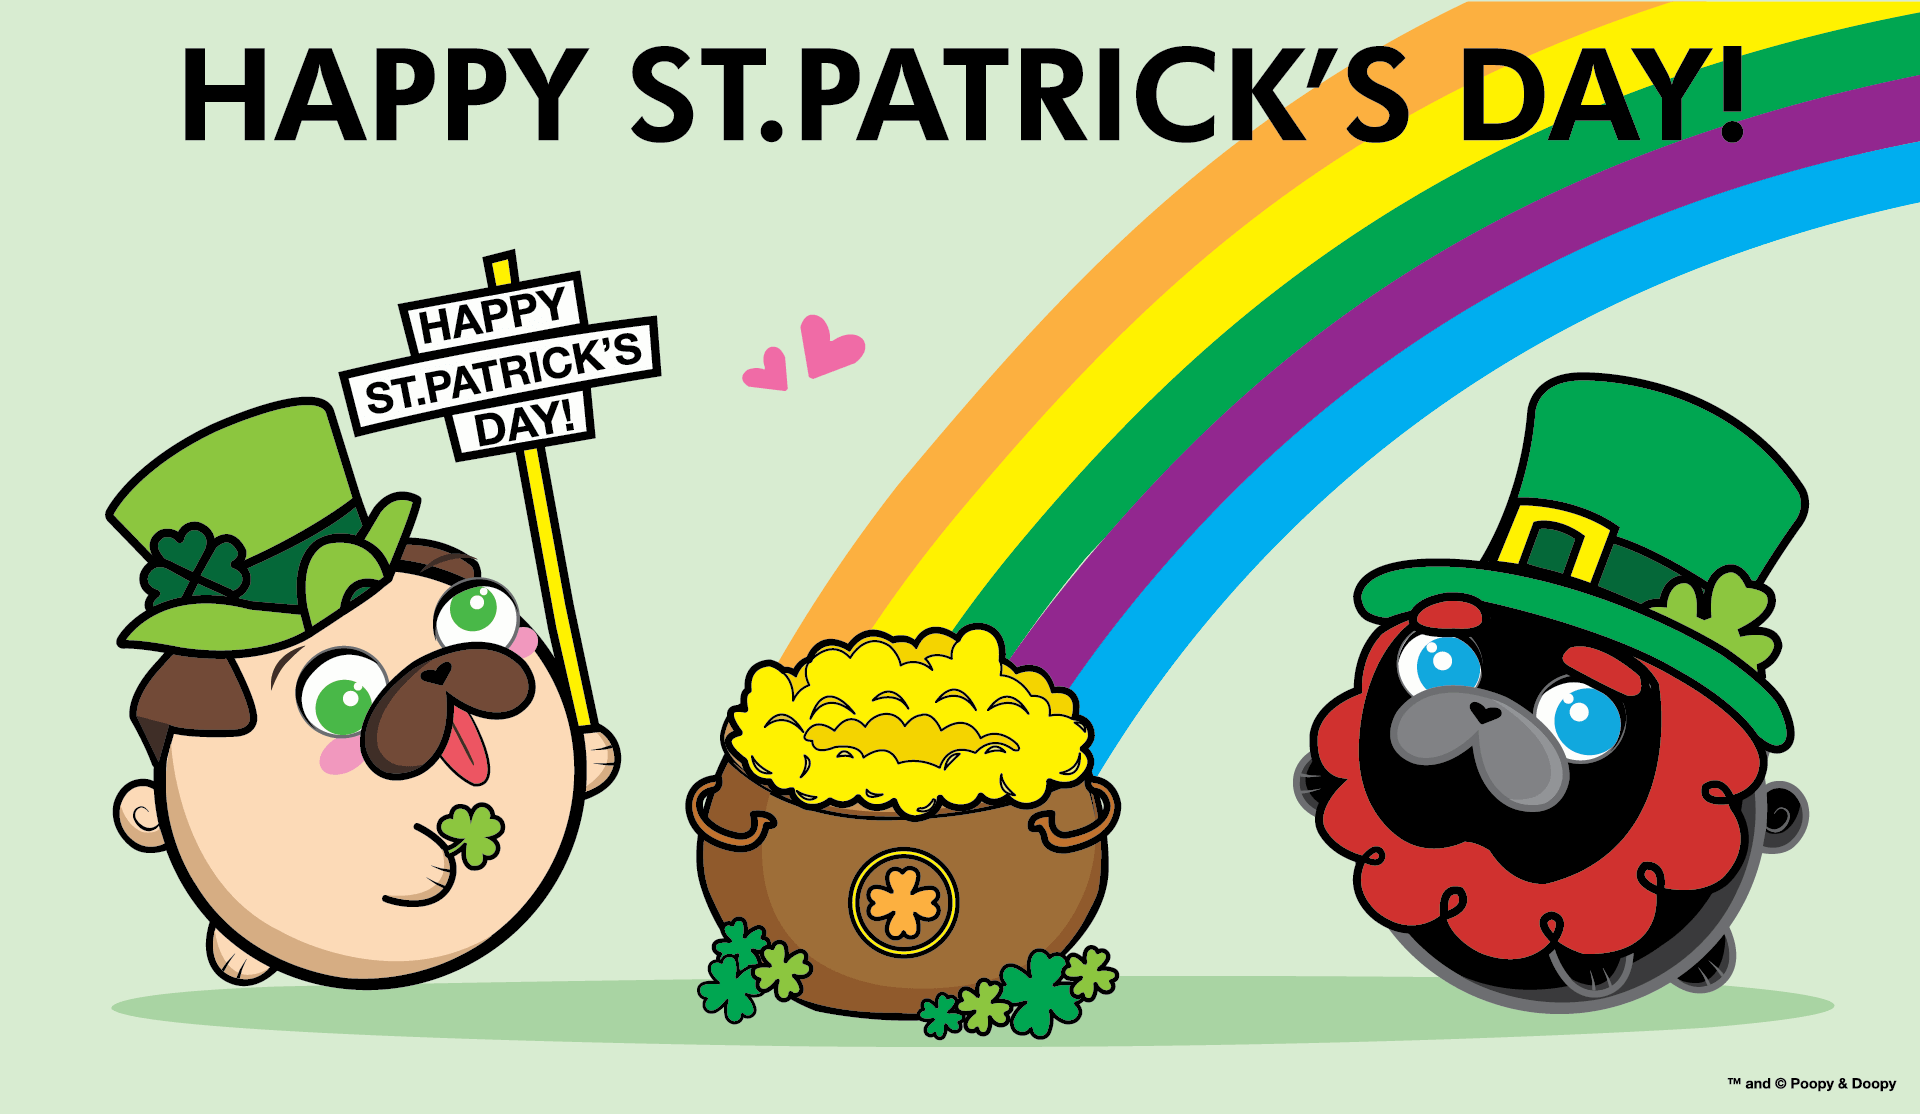 Poopy and Doopy - St. Patrick's Day